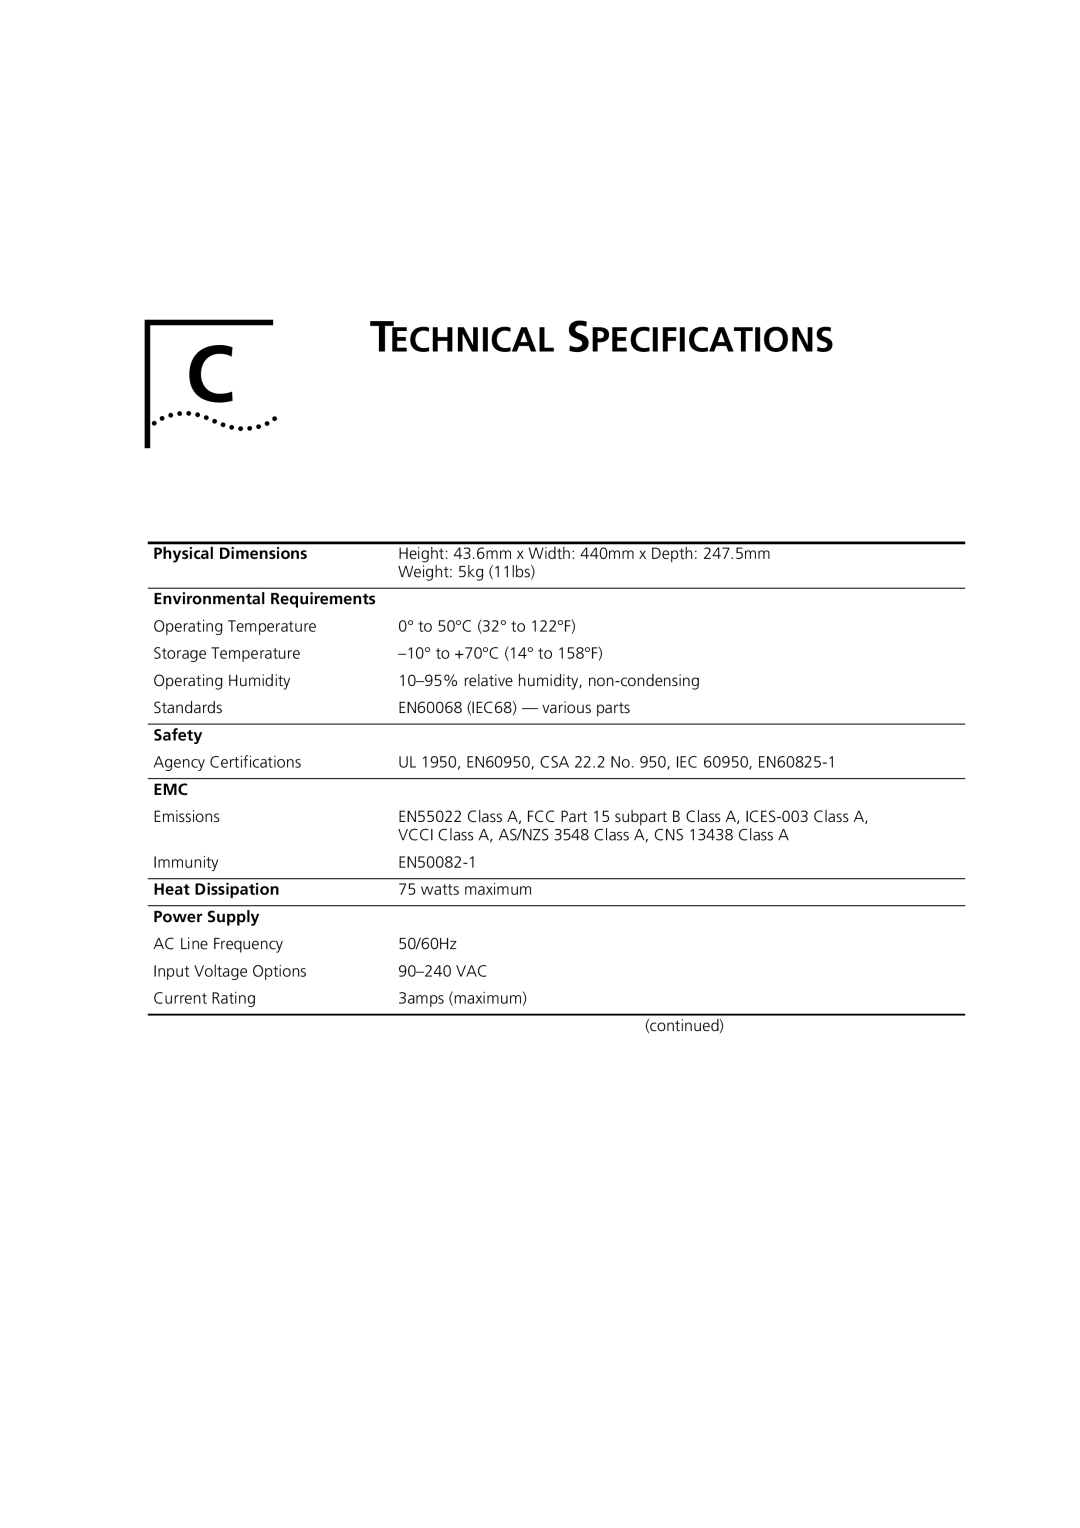 3Com 3C16987 manual Technical Specifications, Physical Dimensions, Environmental Requirements, Safety, Heat Dissipation 